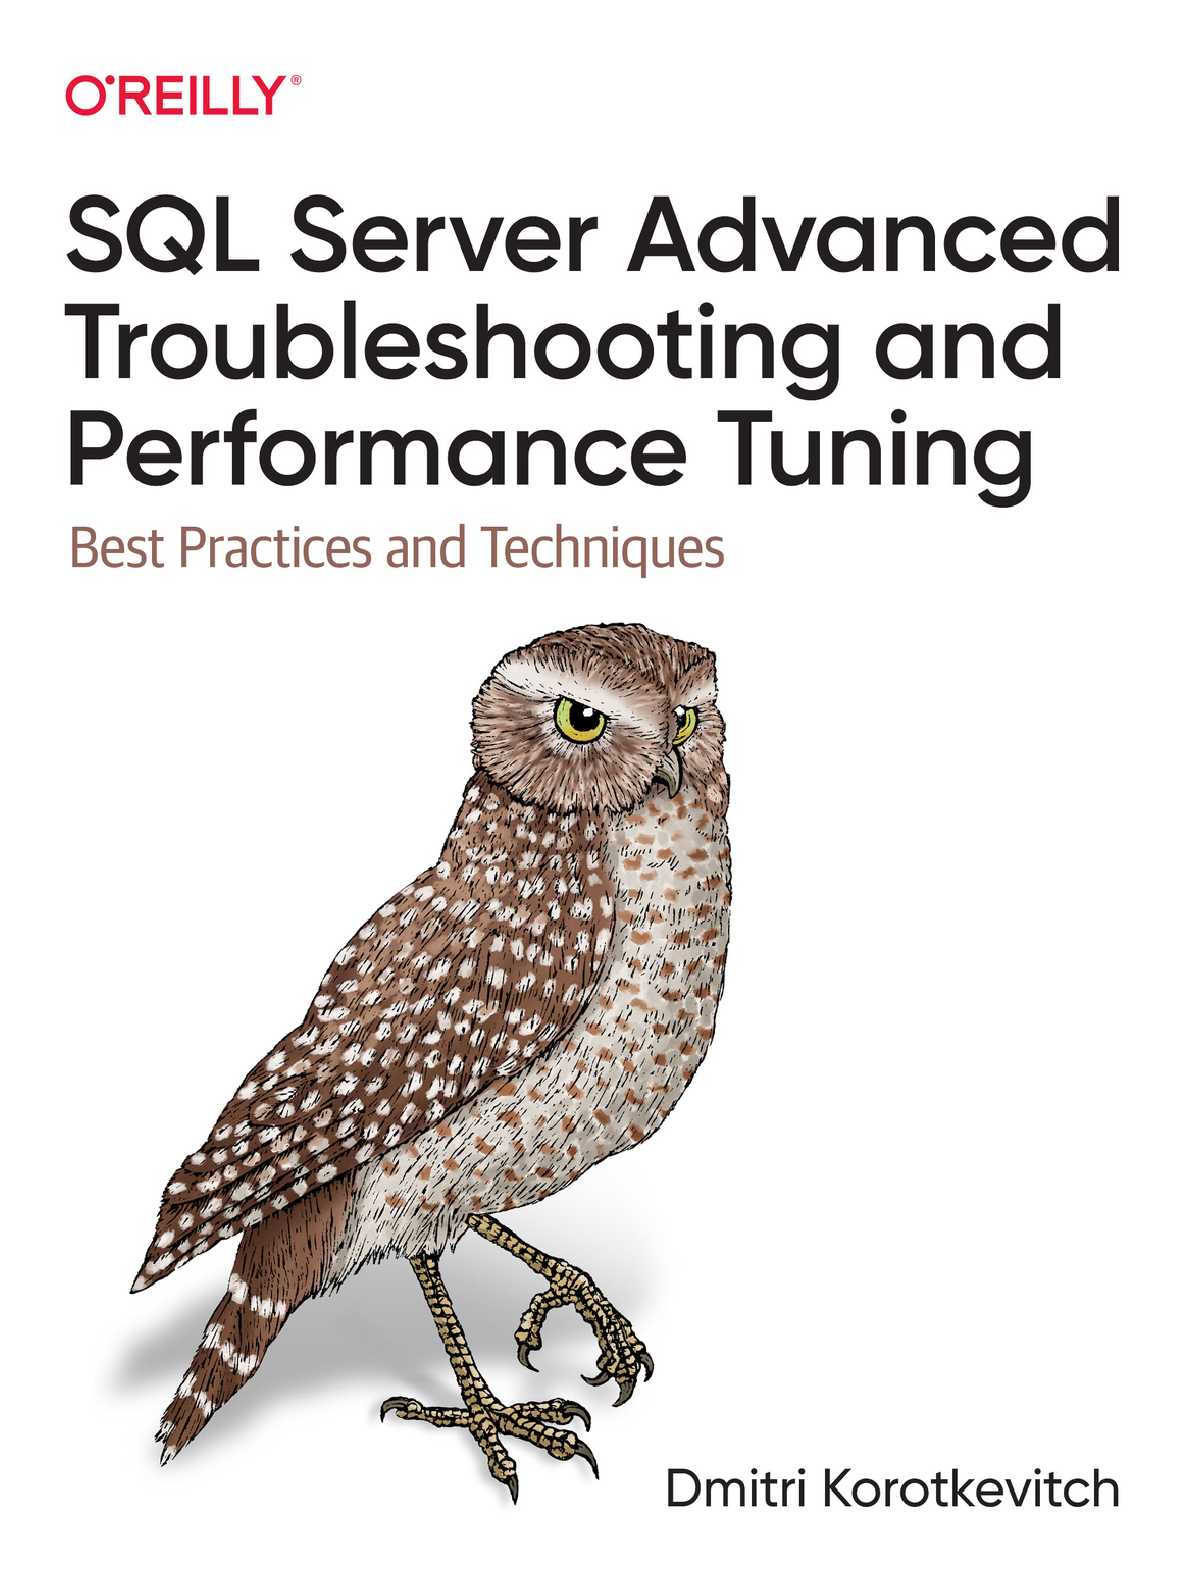 SQL Server Advanced Troubleshooting and Performance Tuning: Best Practices and Techniques PDF